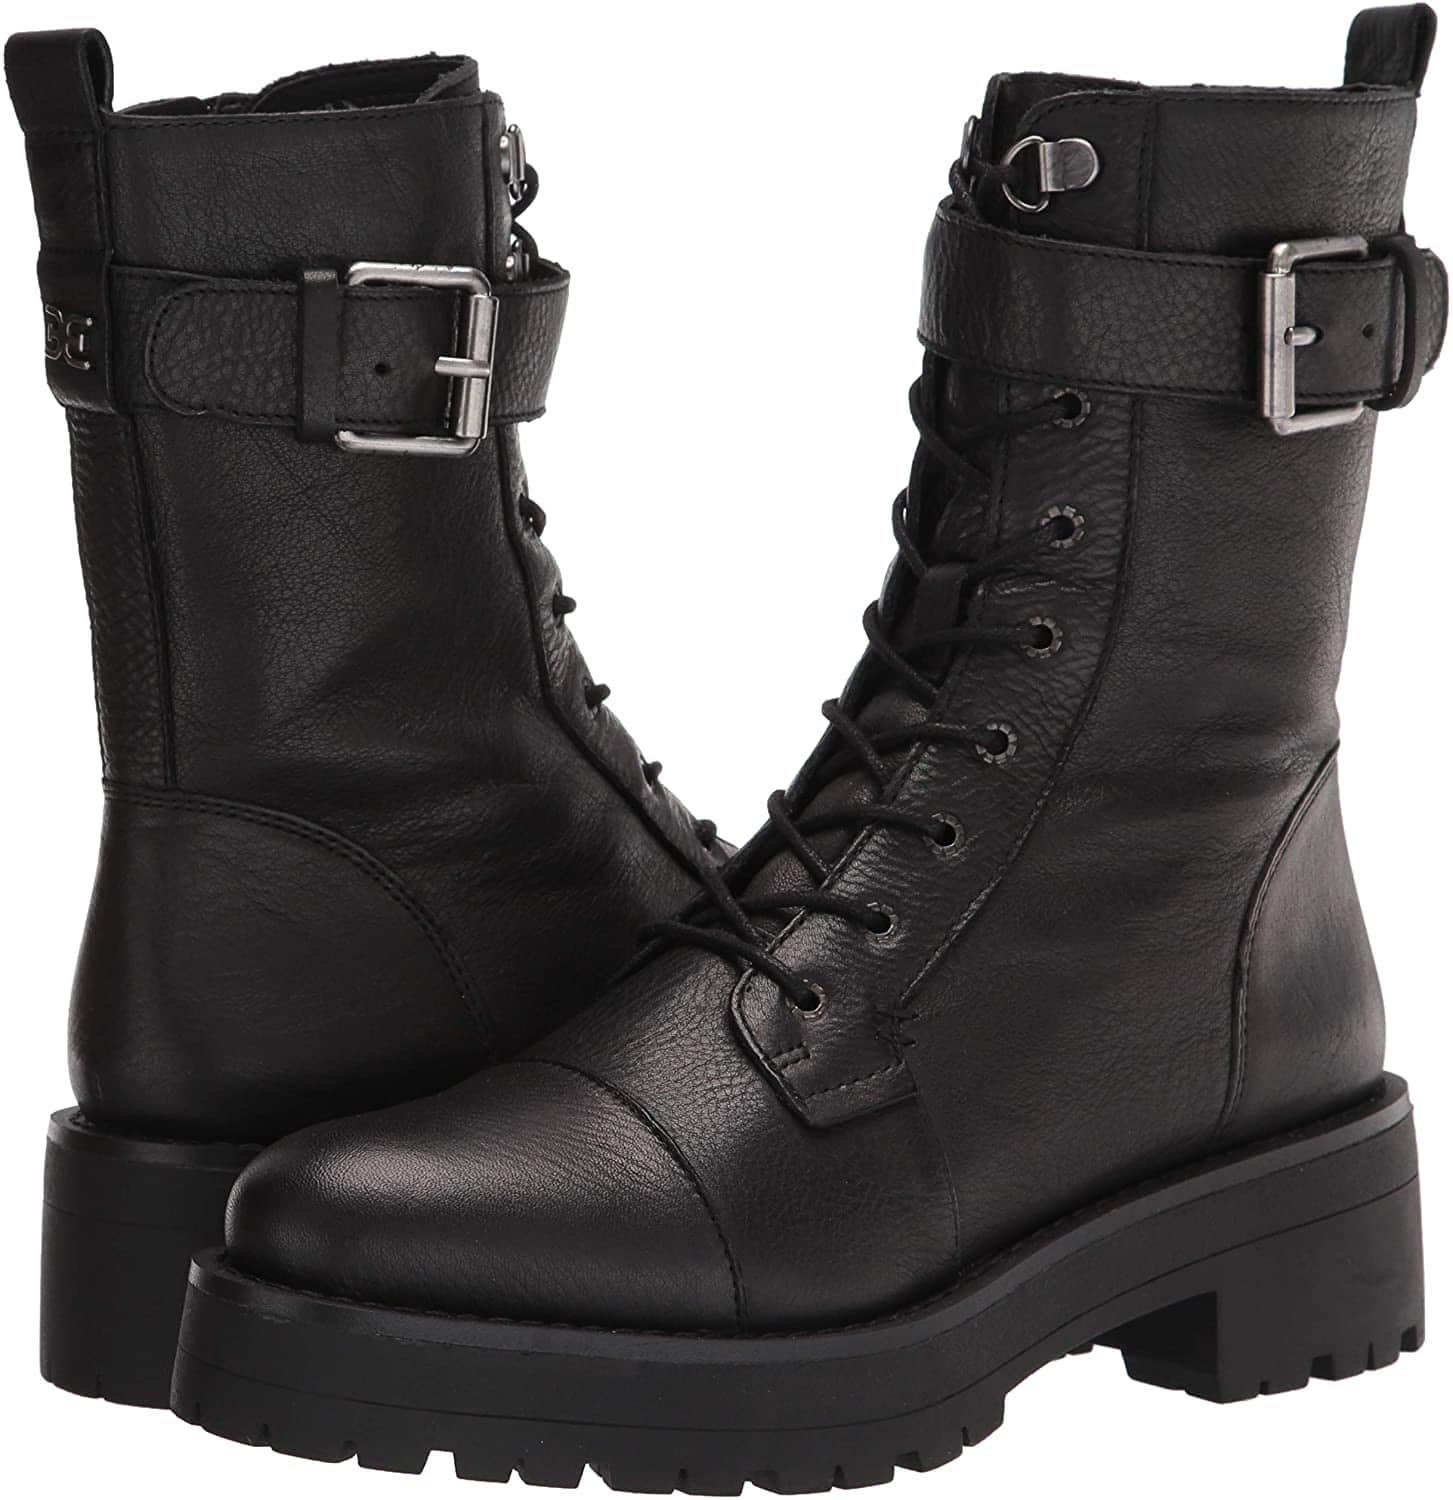 Wide Combat Boots for Women